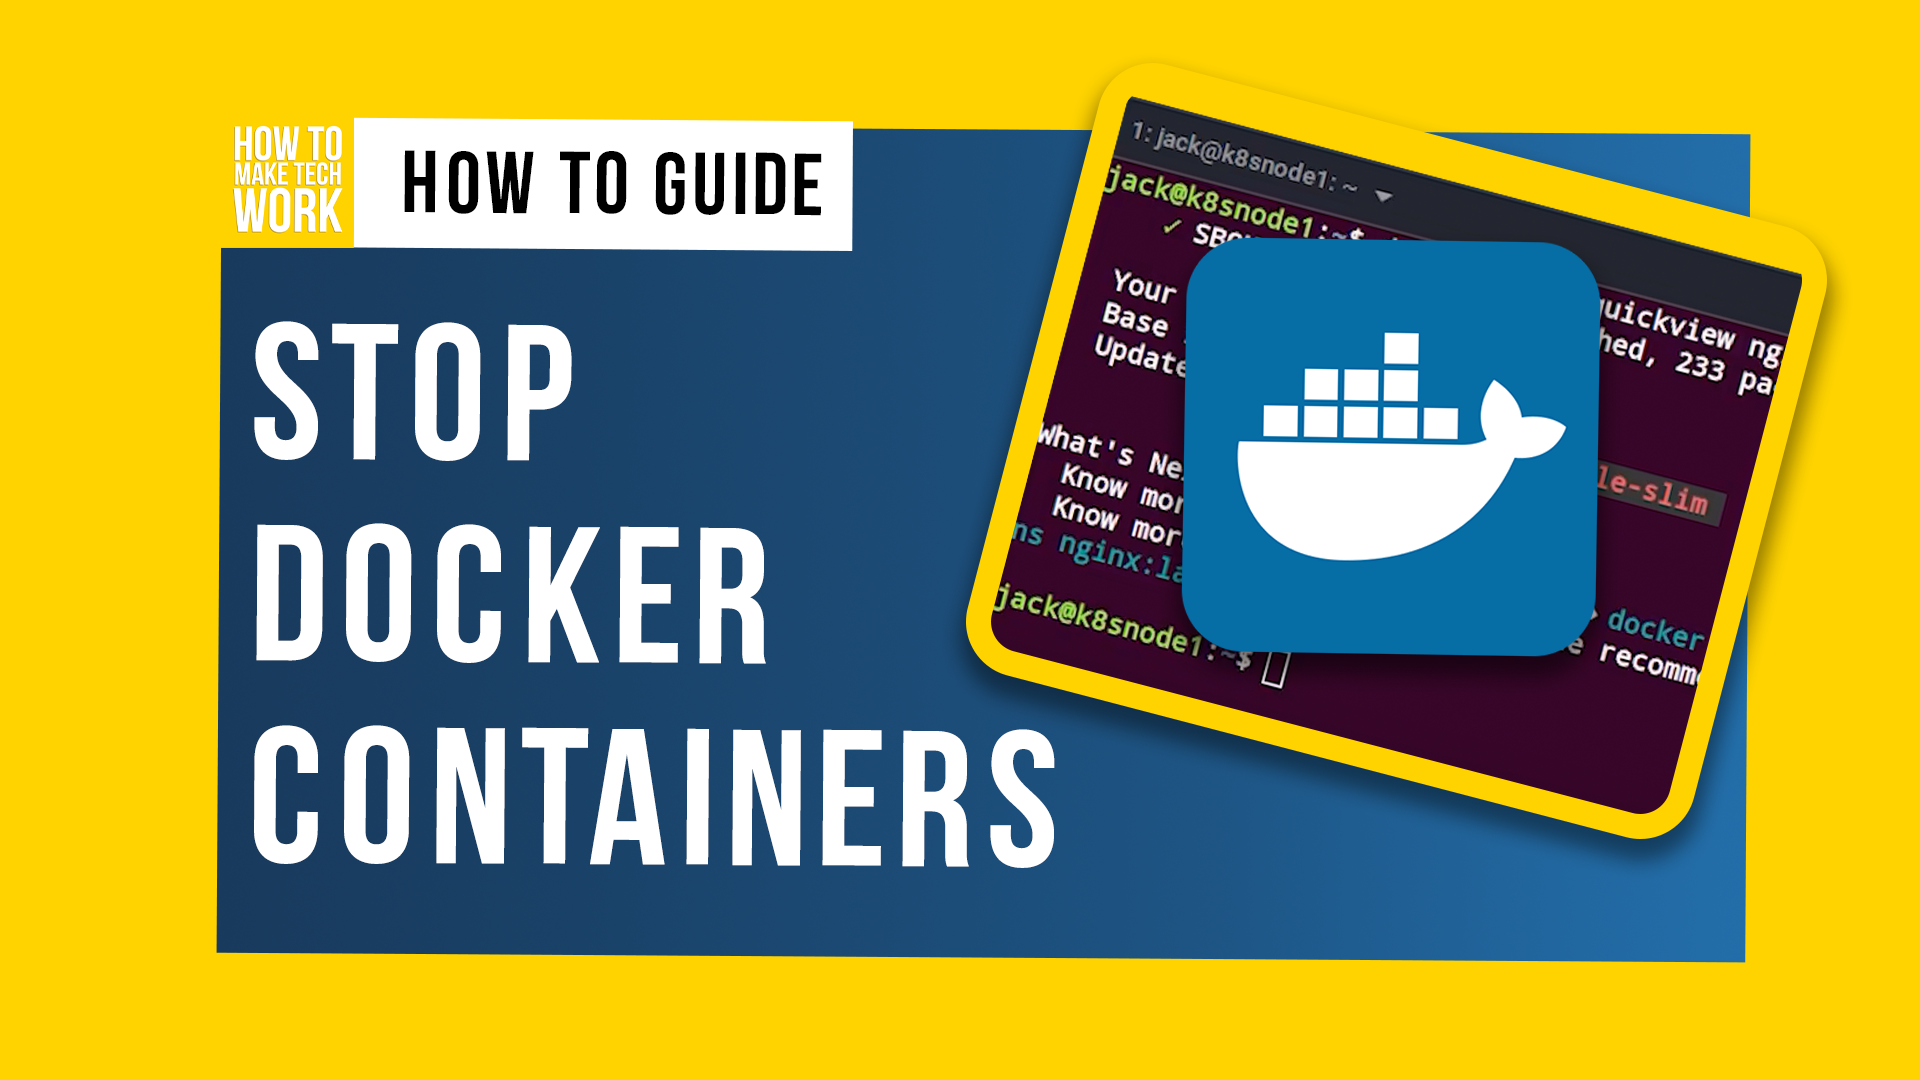 How to Stop and Remove All Docker Containers with 2 Simple Commands